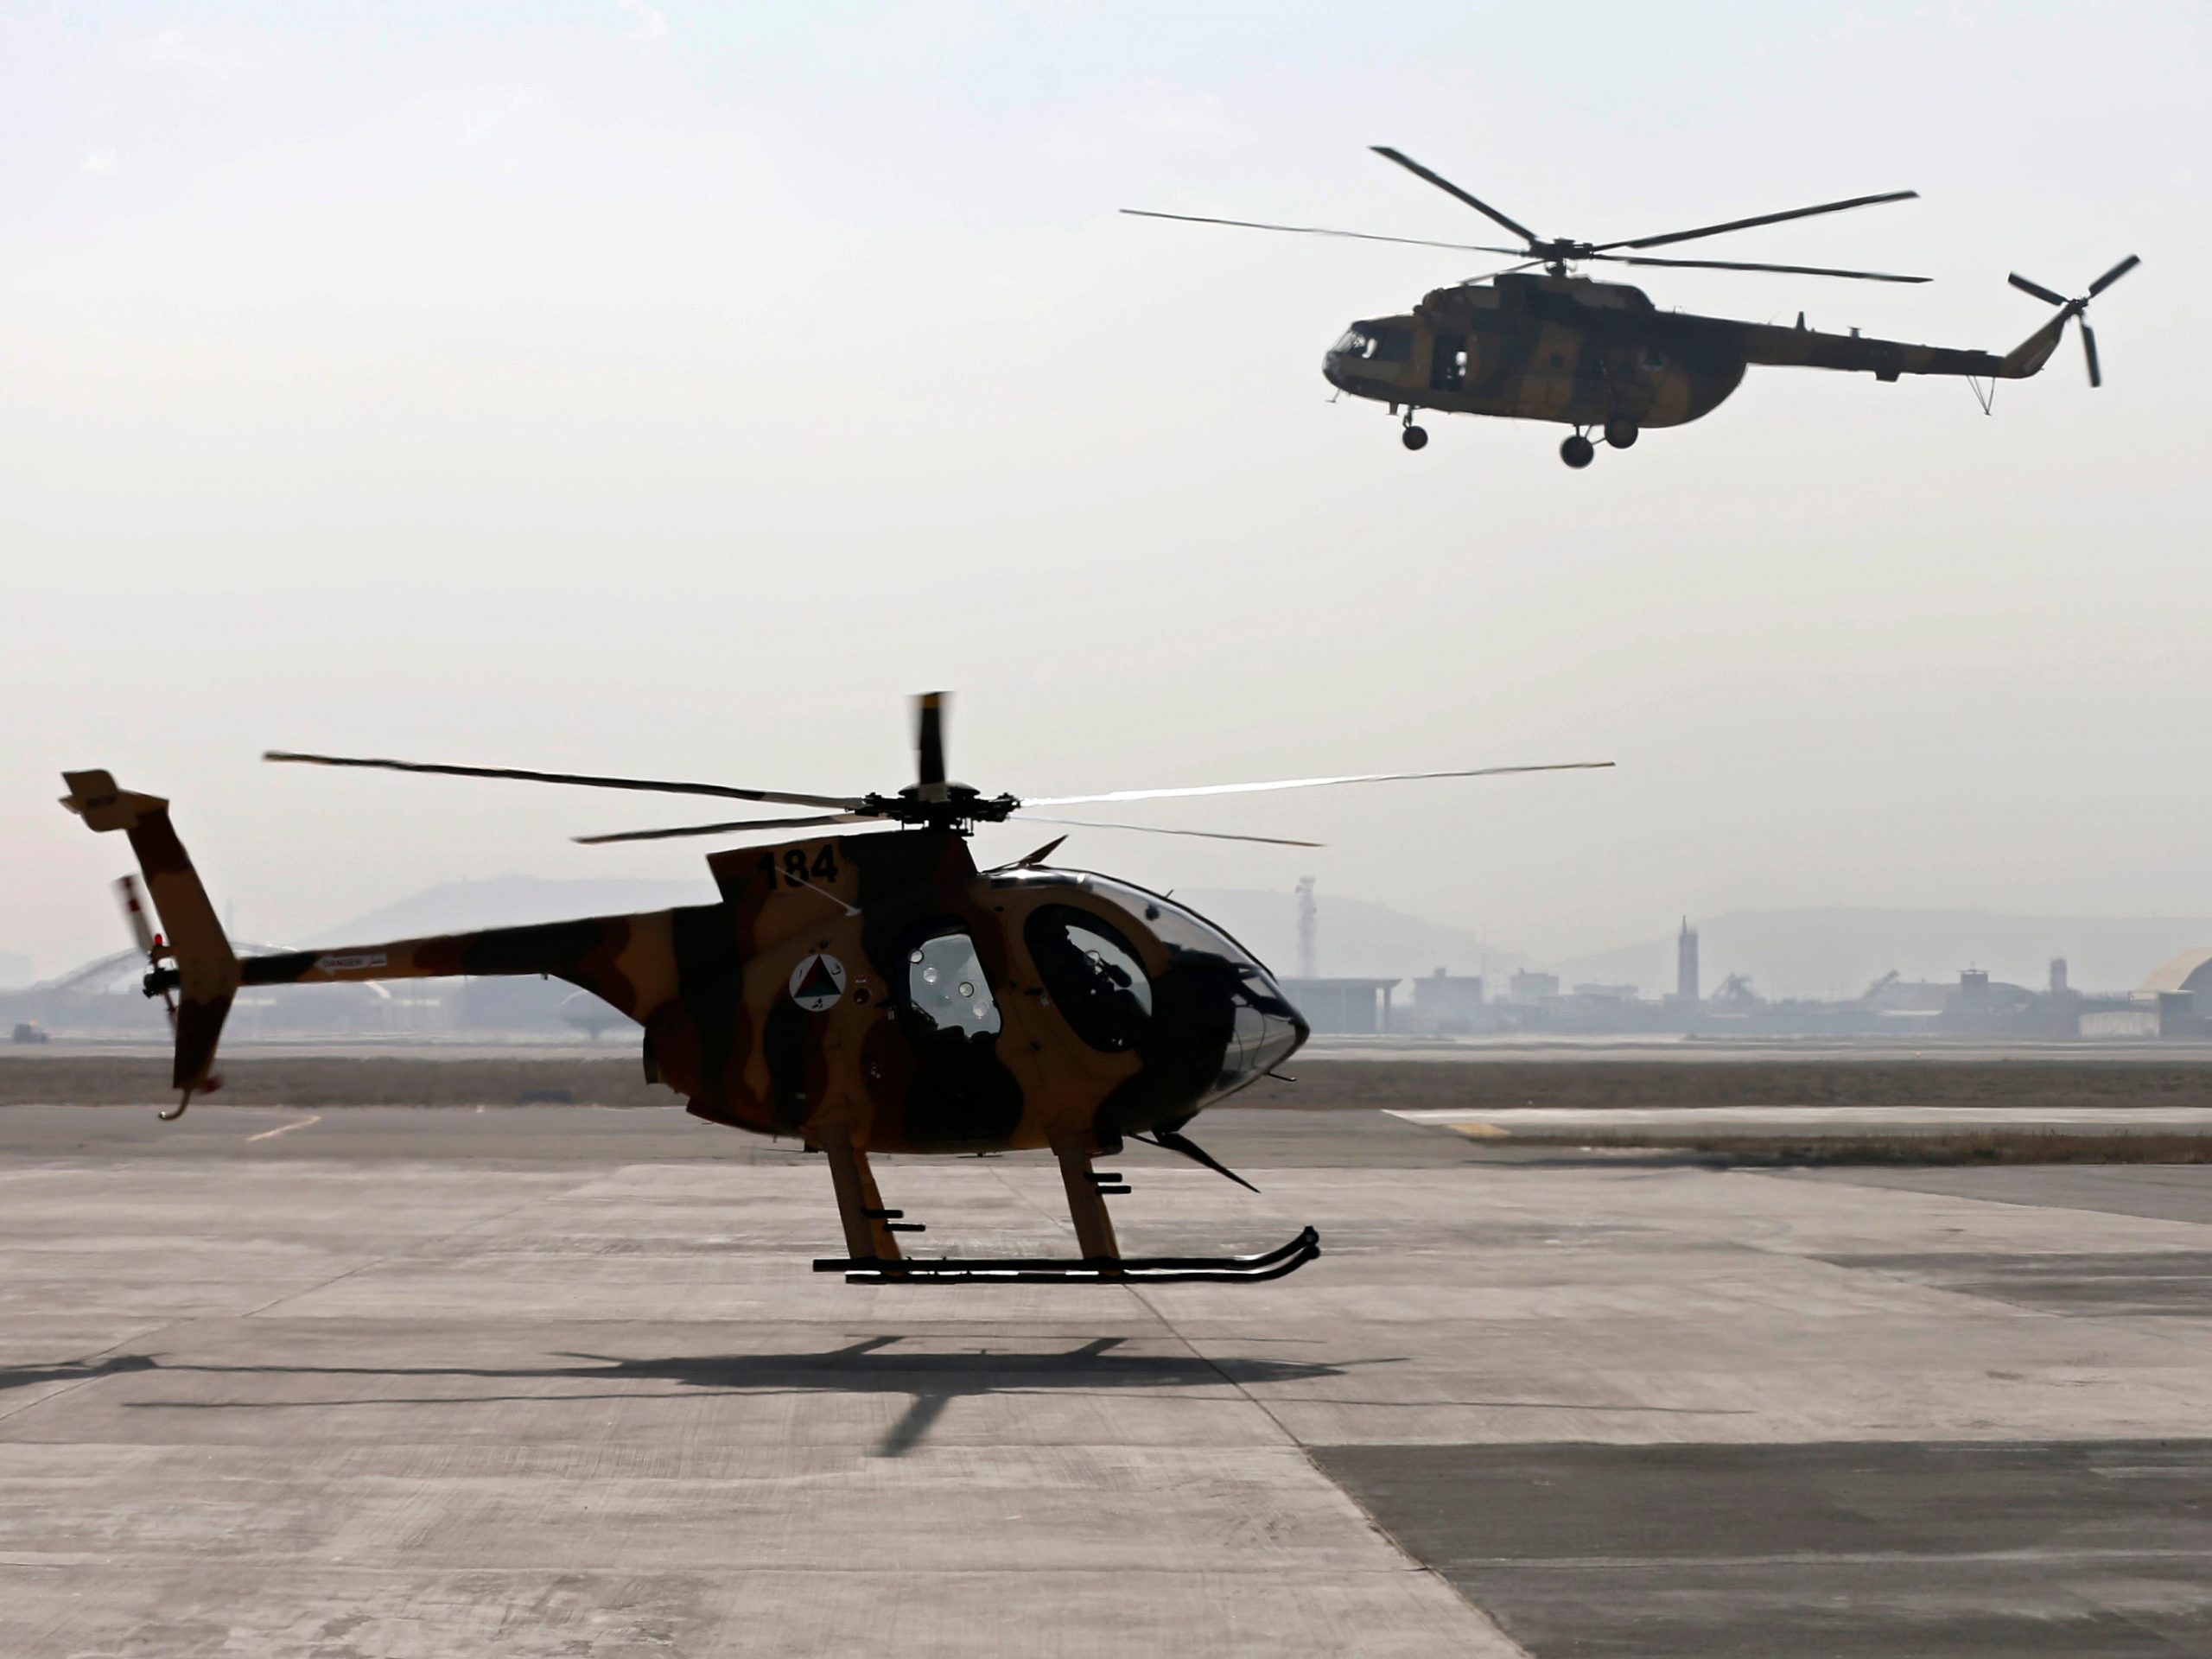 This 2014 photo shows Afghan Air Force helicopters landing at the military airport in Kabul.